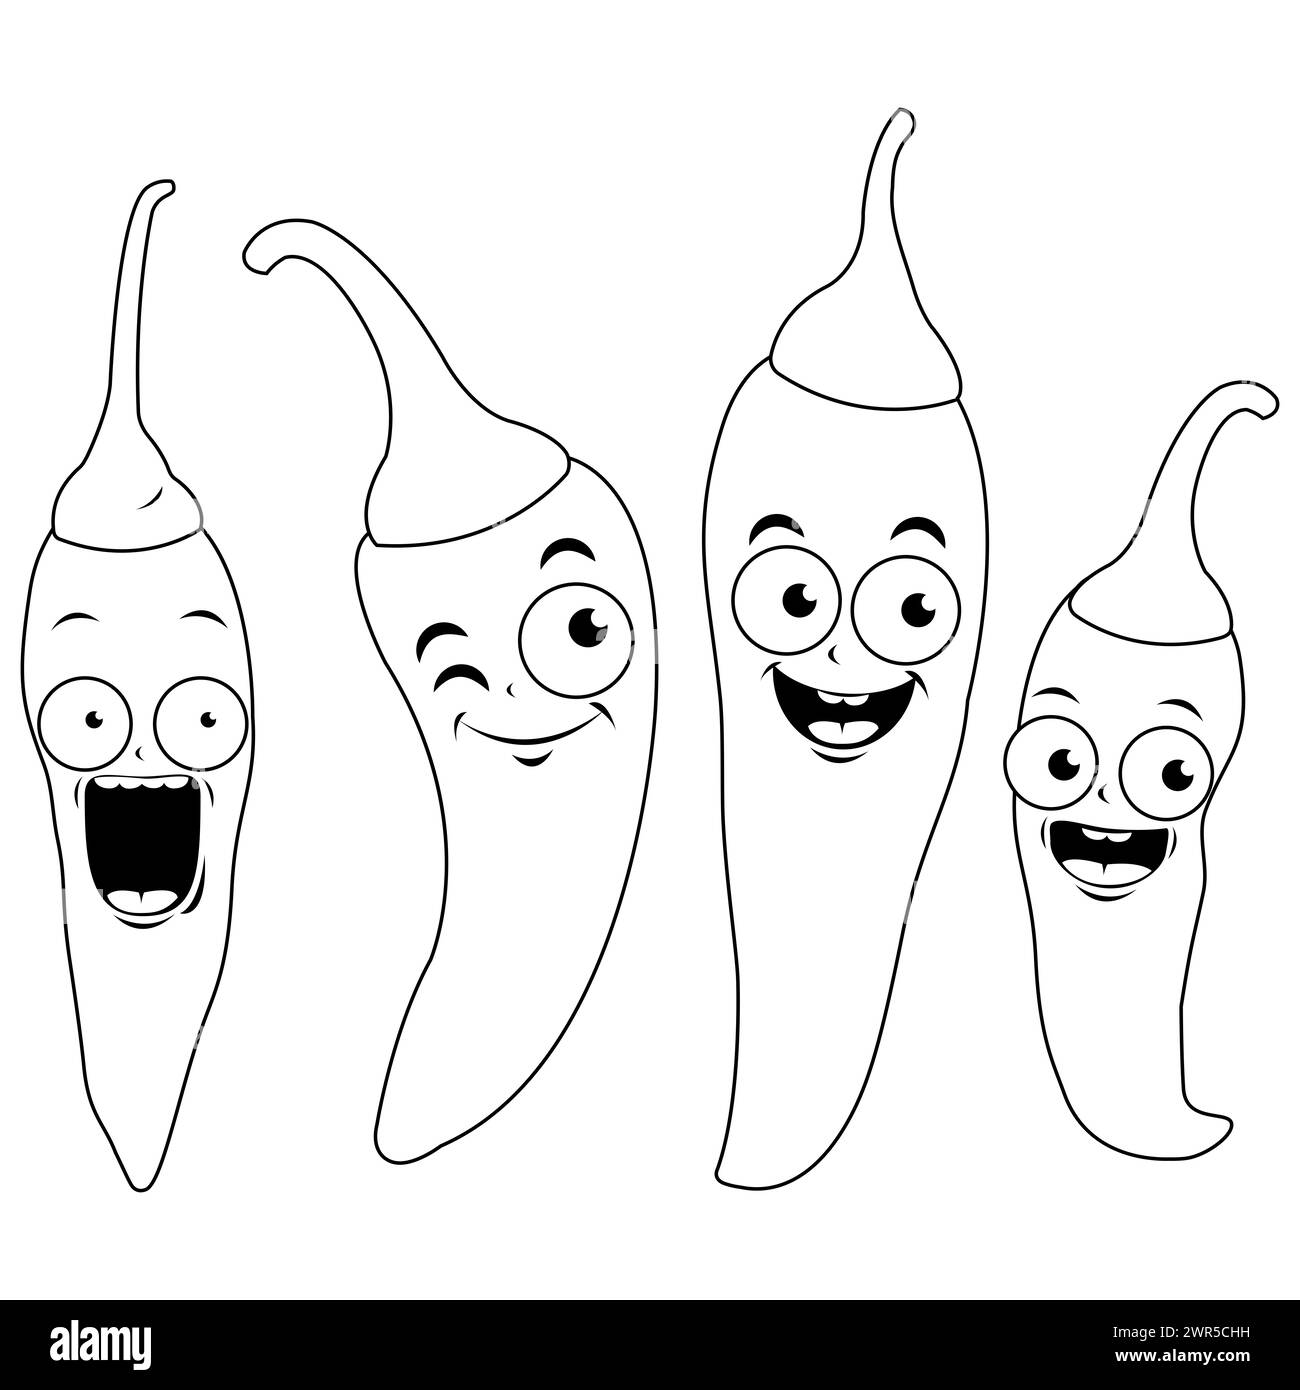 Cartoon hot chili pepper characters. Mexican spicy chili jalapeno peppers. Black and white coloring page Stock Photo